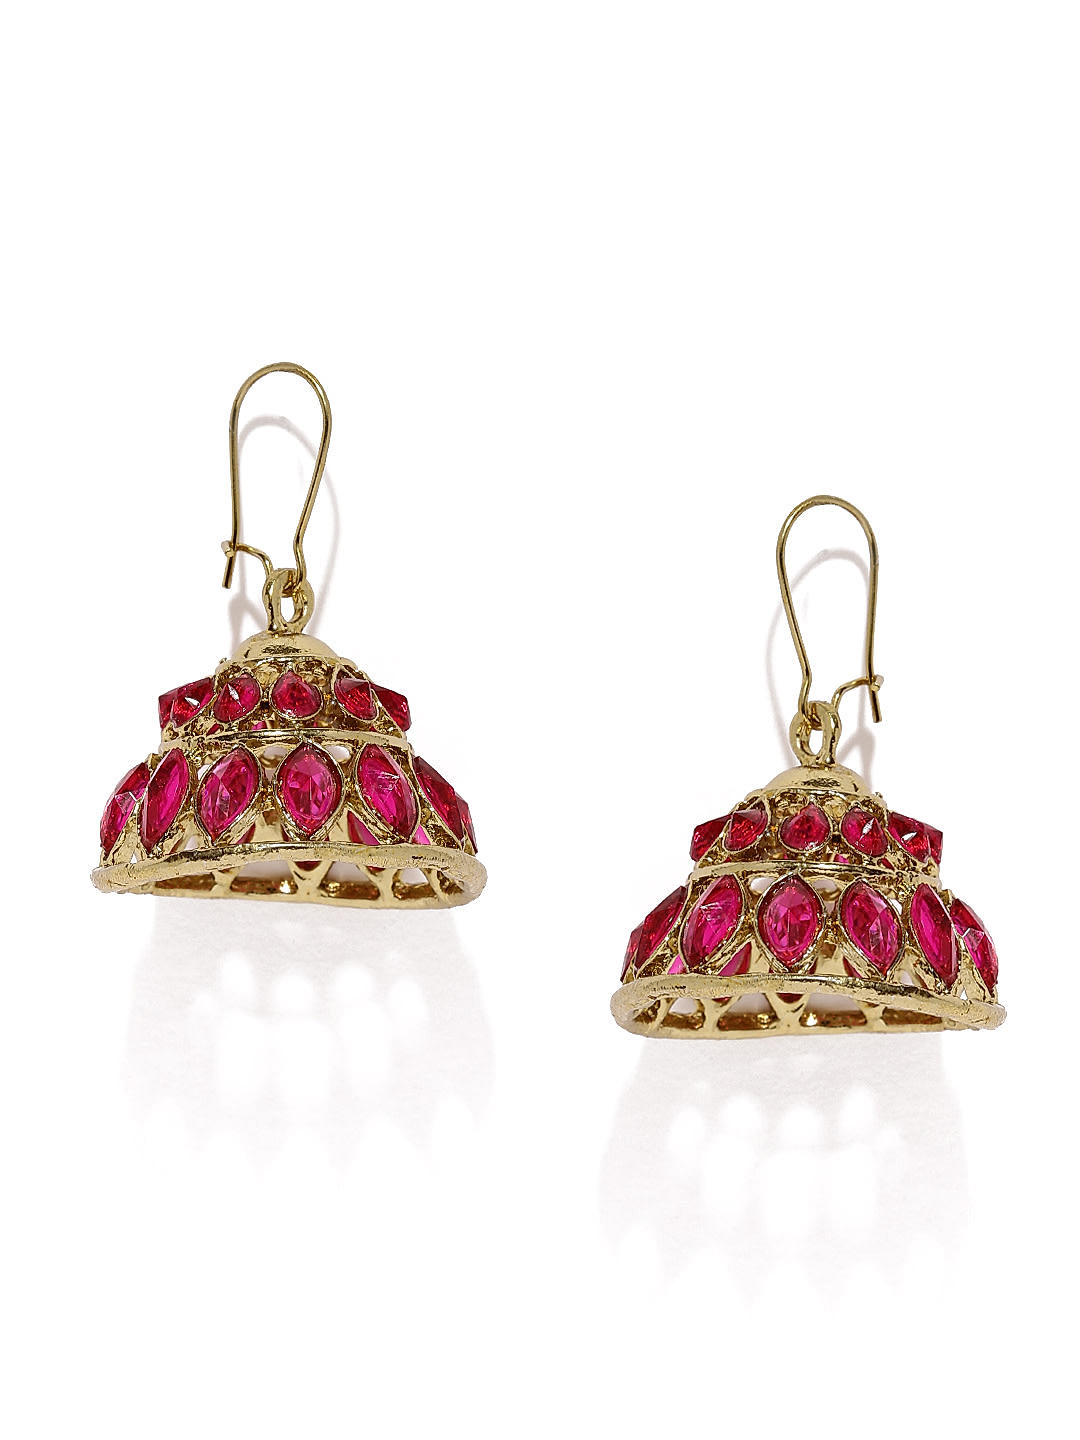 Lalitha Jewellery Gold Earrings Collections  Lalitha Jewellery Stone  Earrings HD Png Download  Transparent Png Image  PNGitem